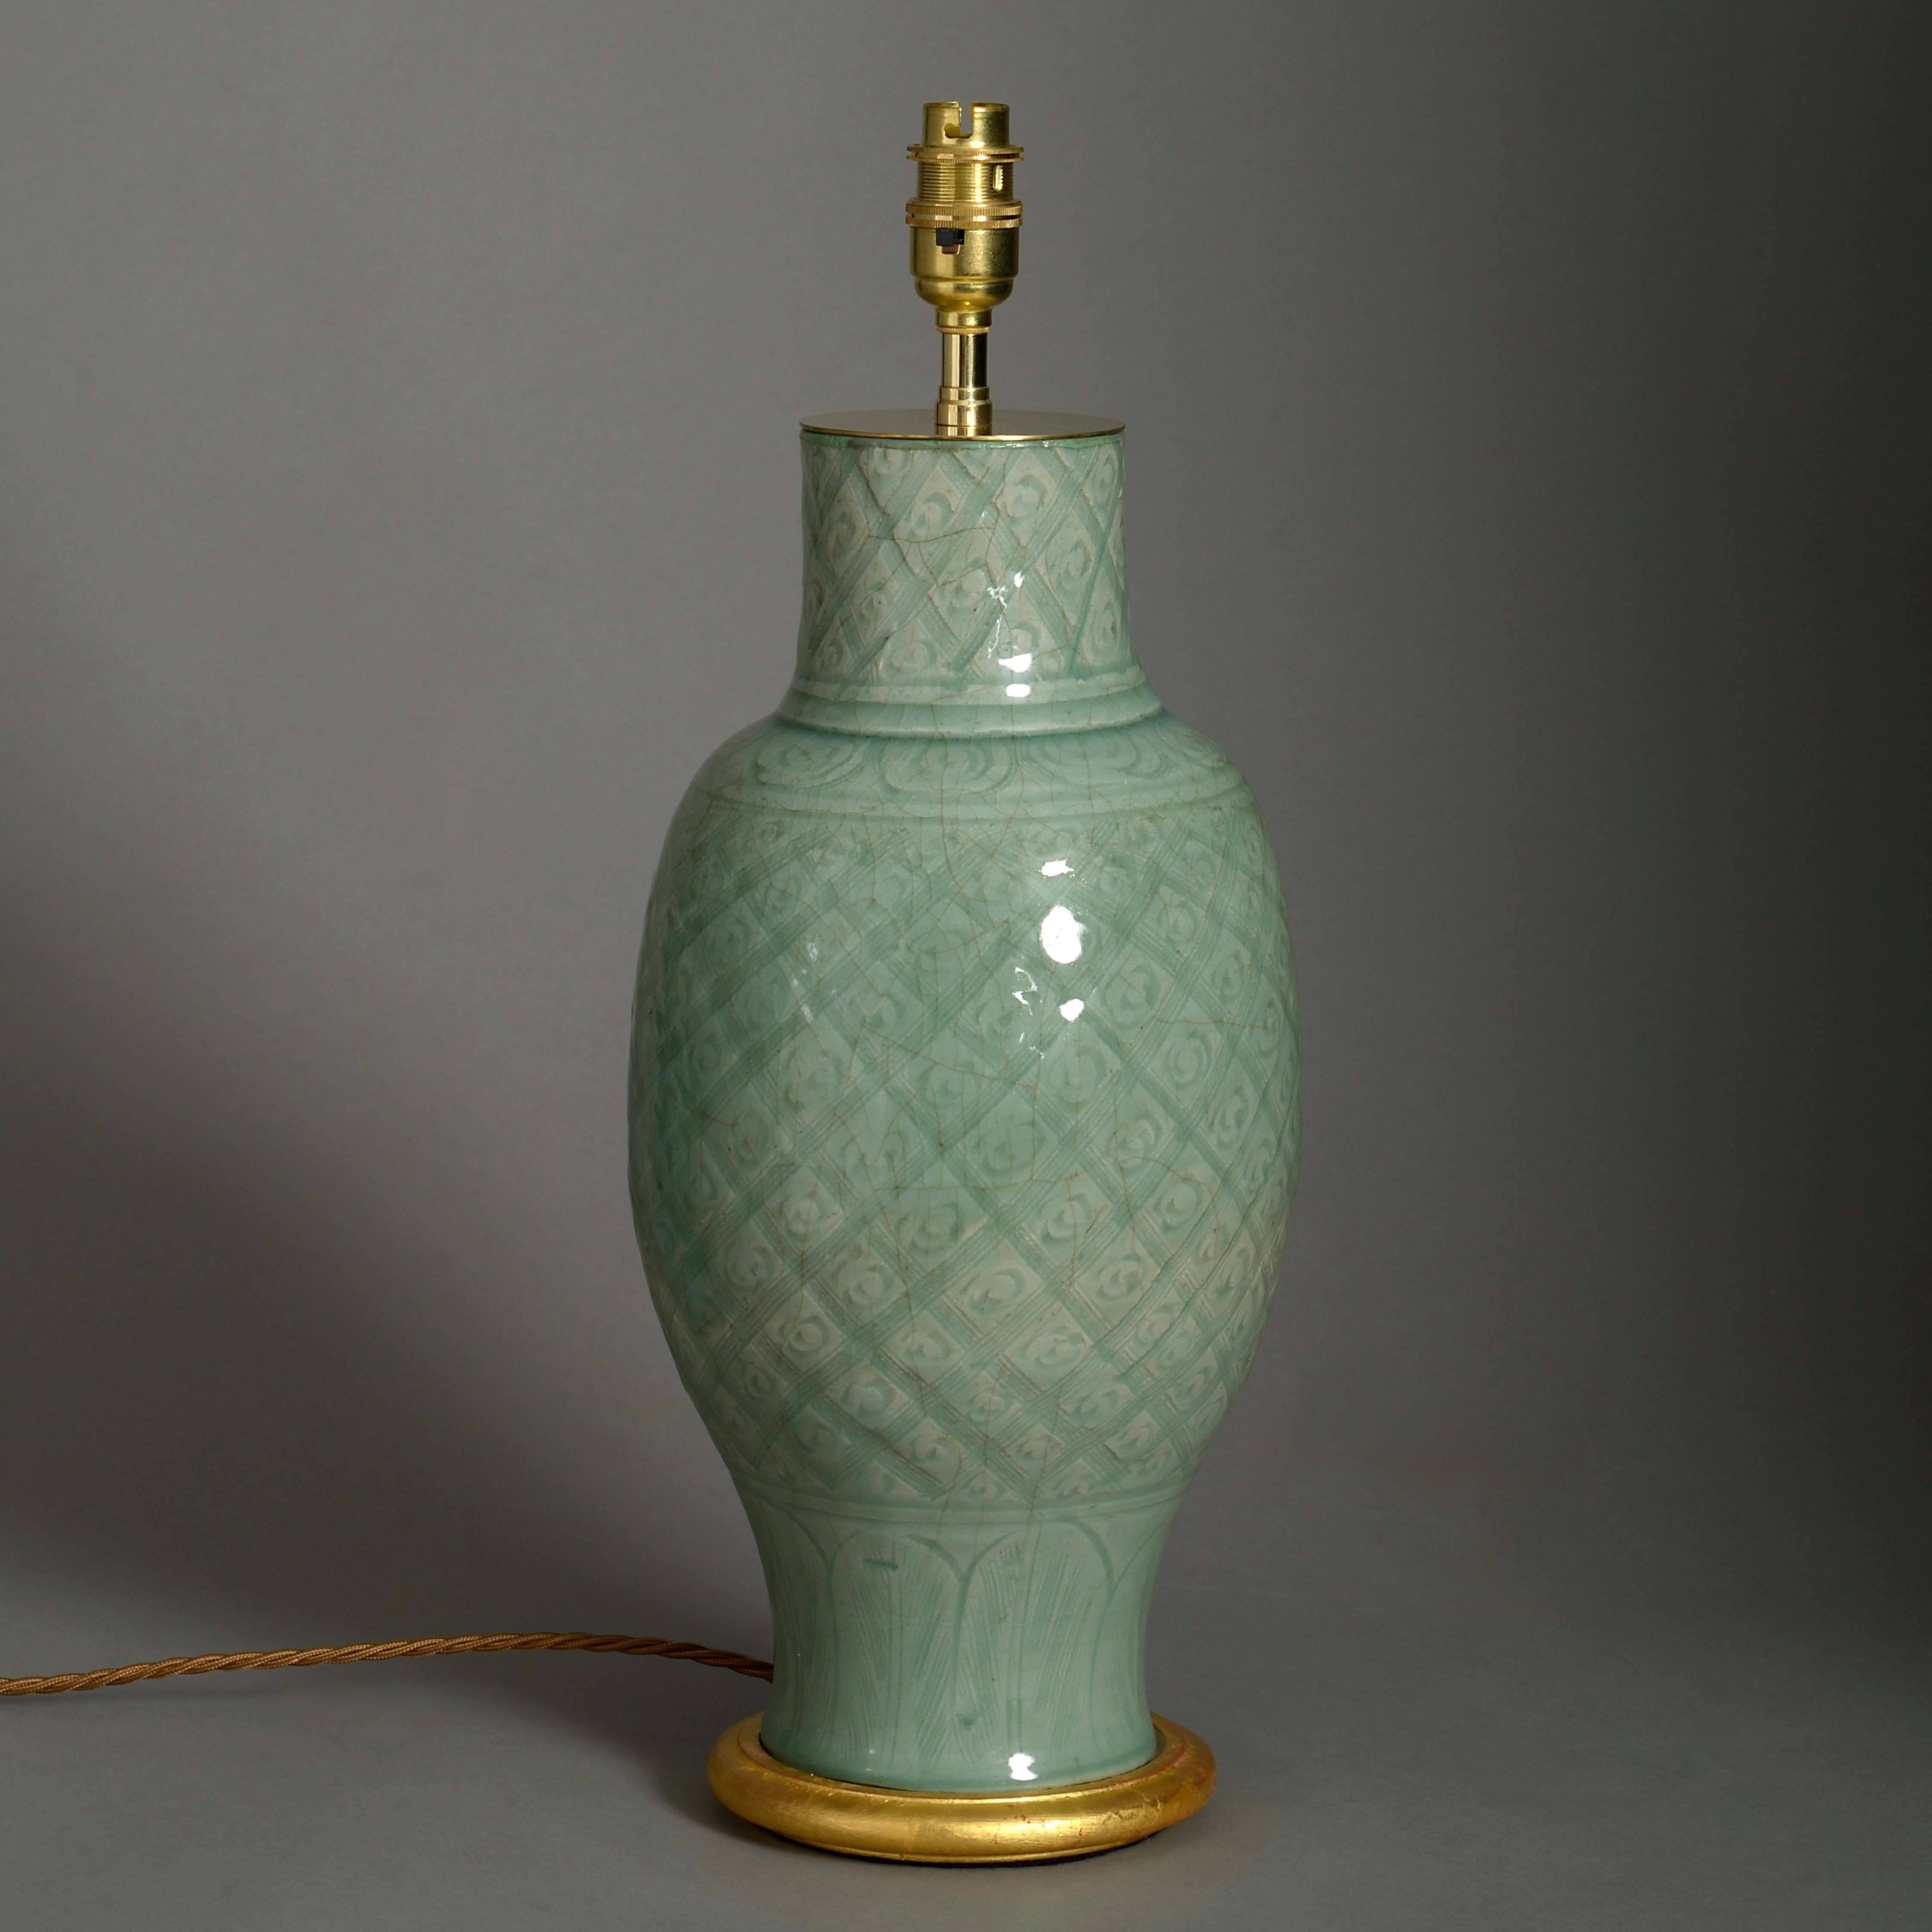 A mid-16th century celadon porcelain vase, the body with inscribed crosshatching and foliate decoration. Now mounted on a turned giltwood base and wired as a lamp. Neck slightly reduced.

Ming Period, circa 1550

Height dimensions refer to vase